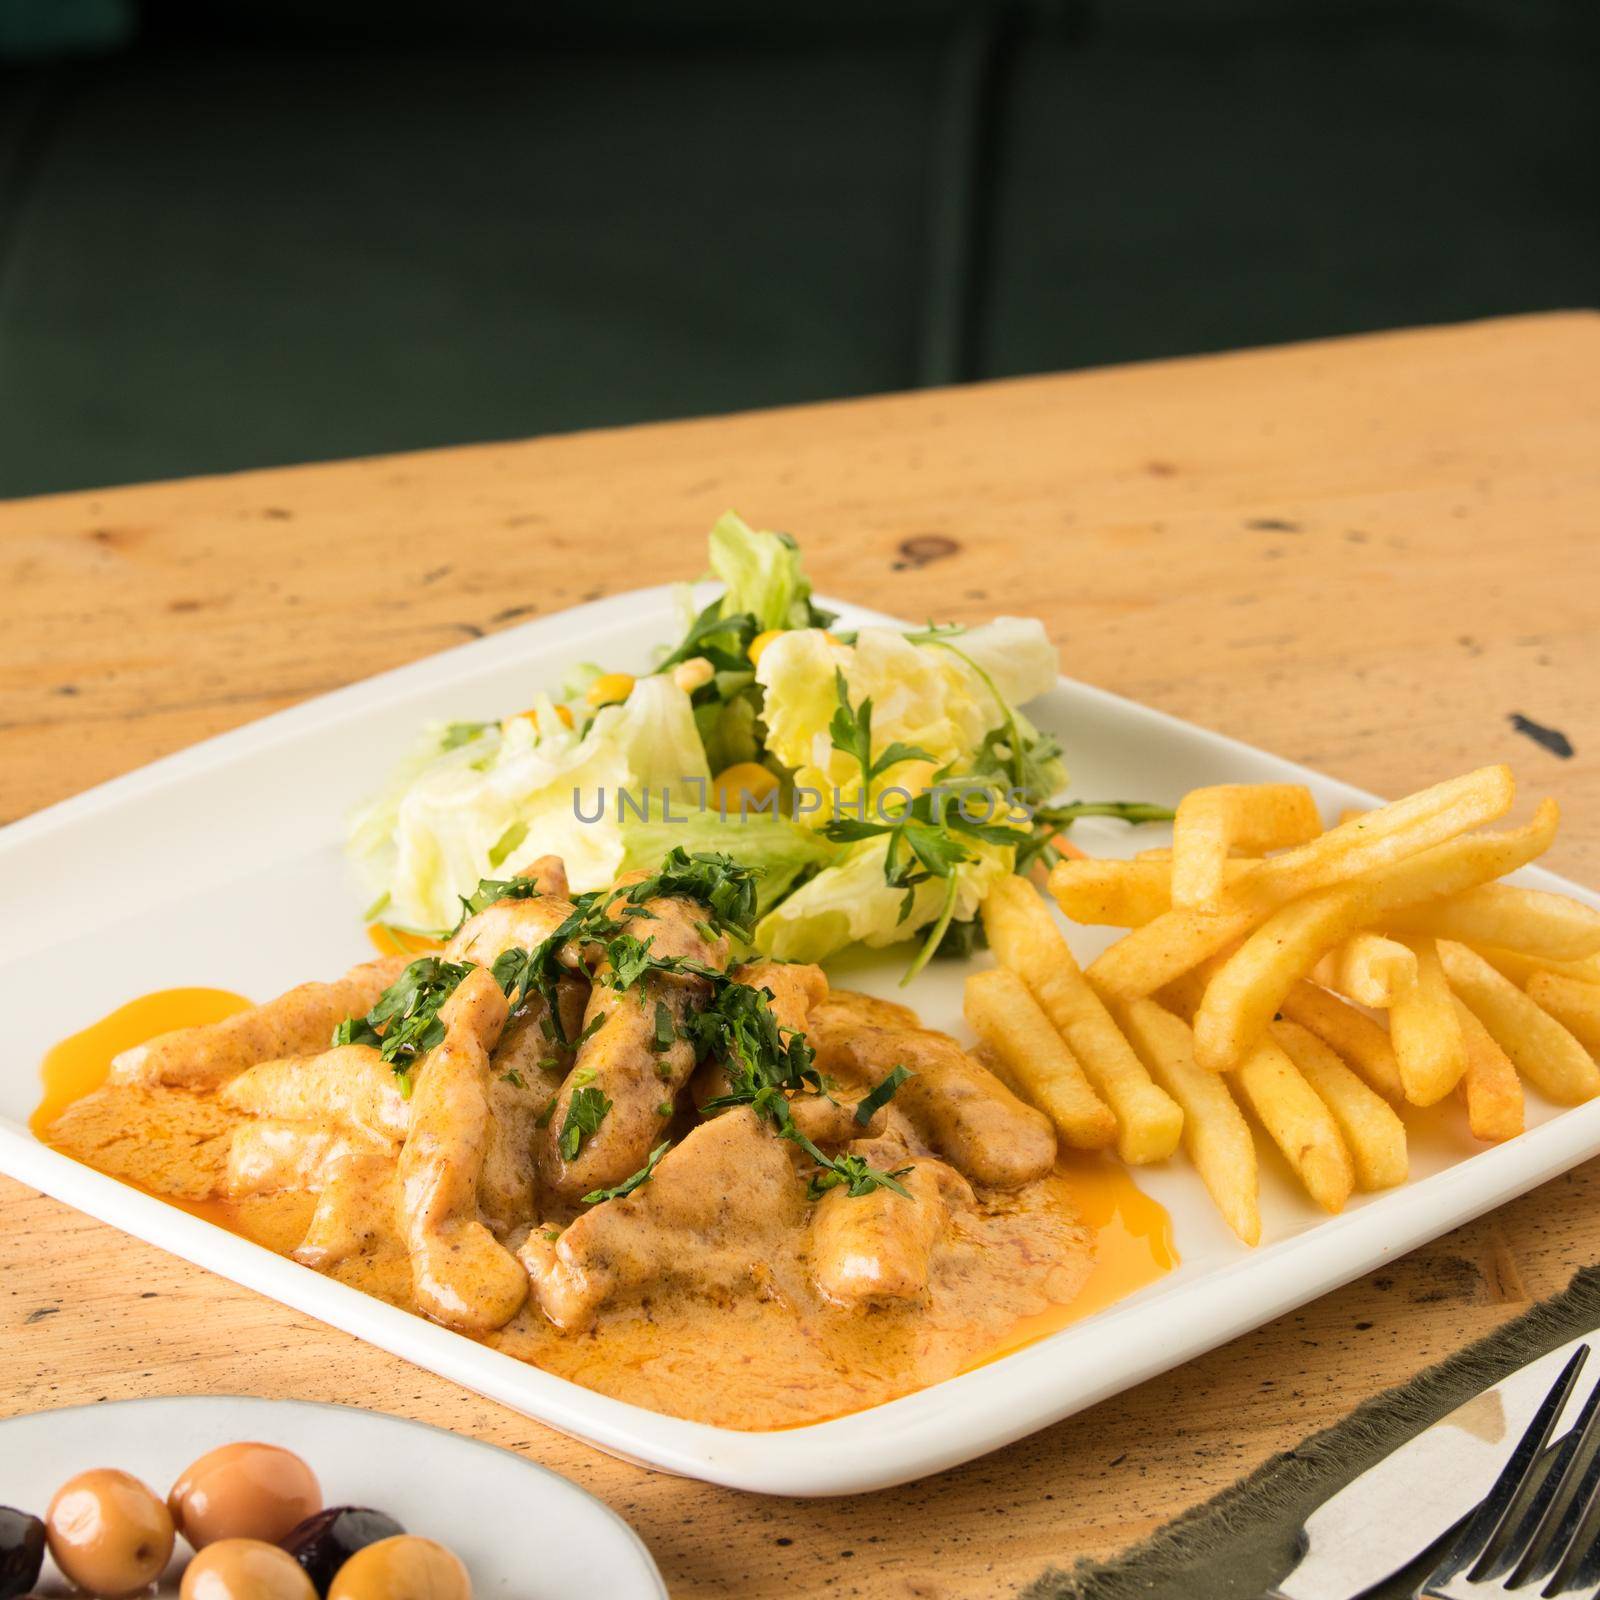 A closeup of a meal with chicken, french fries, salad and olives on a table